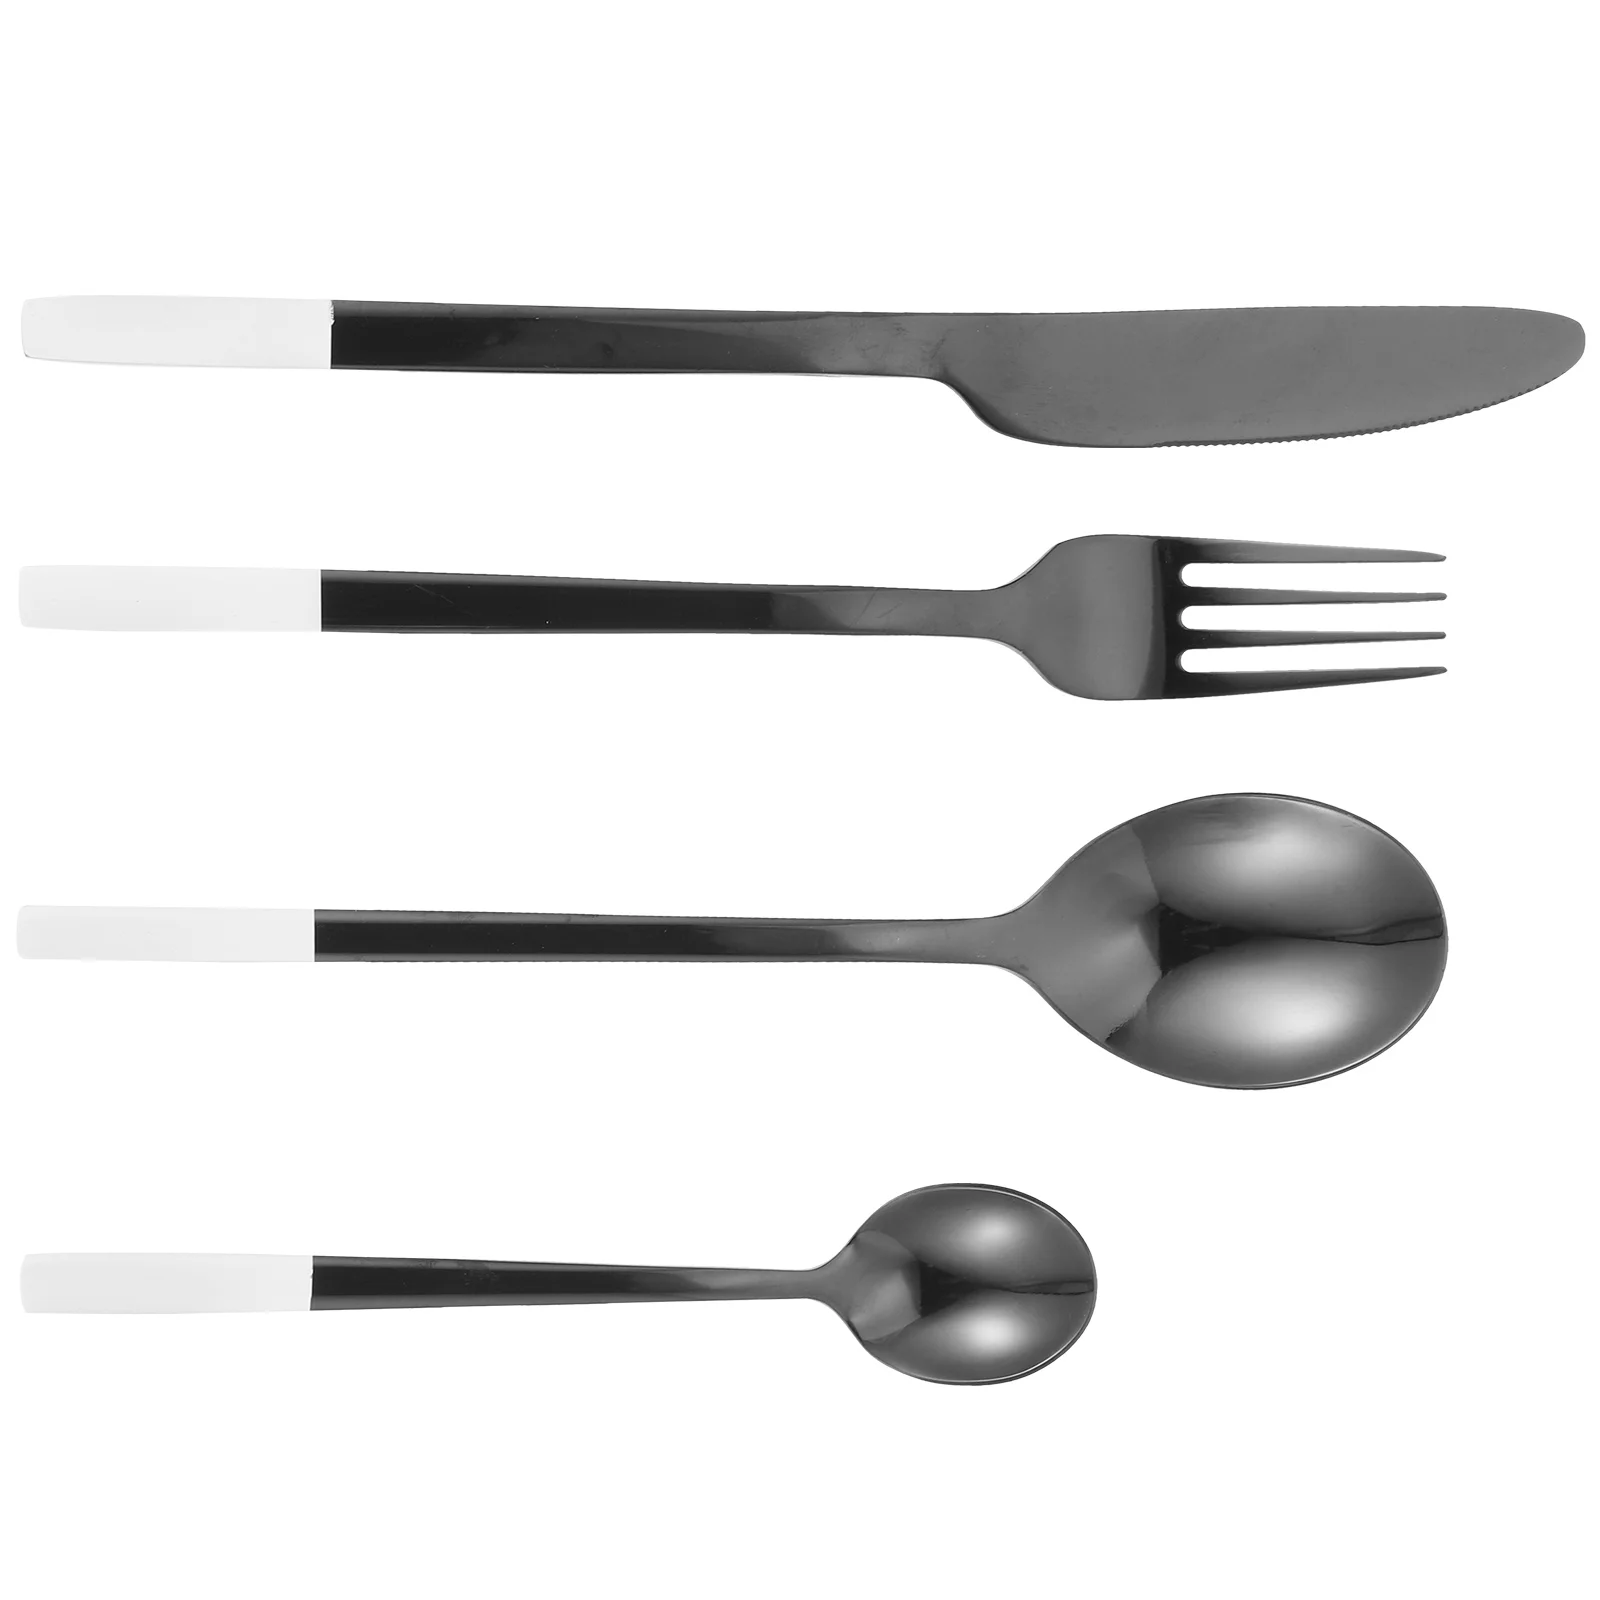 

Set Cutlery Spoon Flatware Tableware Serving Western Kitchen Utensil Utensils Dining Beef Cutting Cheese Travel Camping Soup